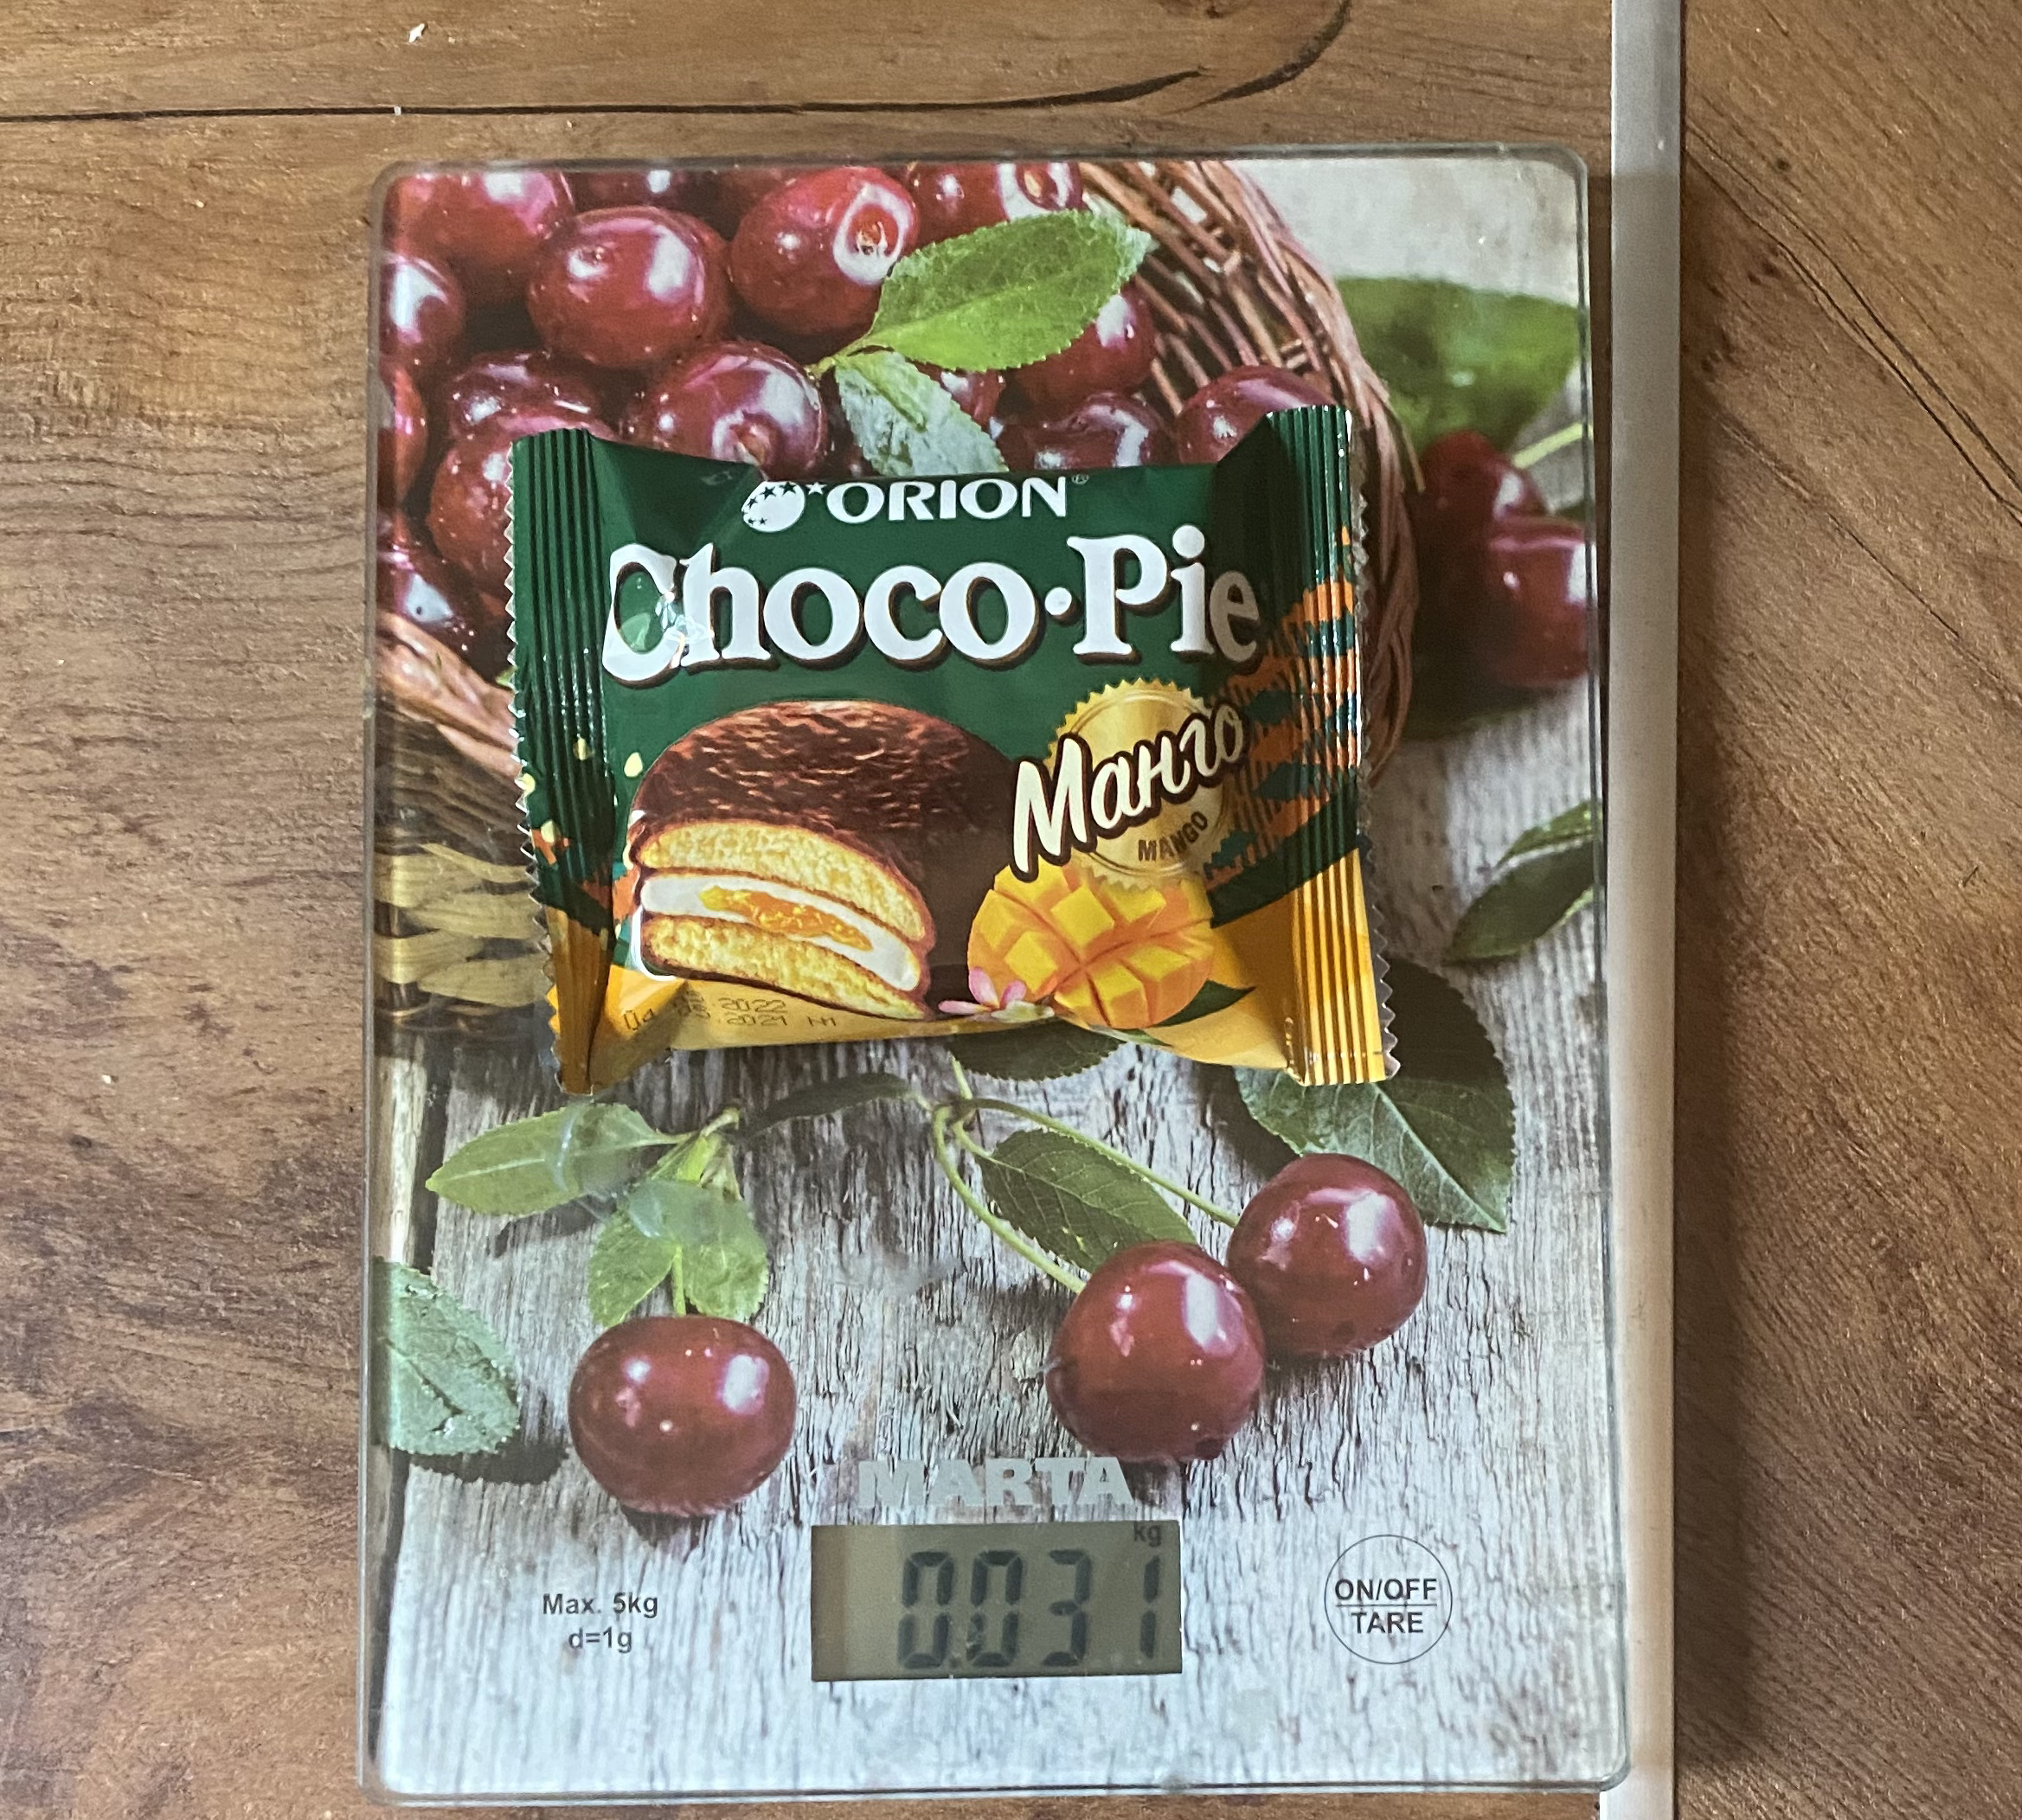 How much does Choco pie with mango weigh 1 piece?